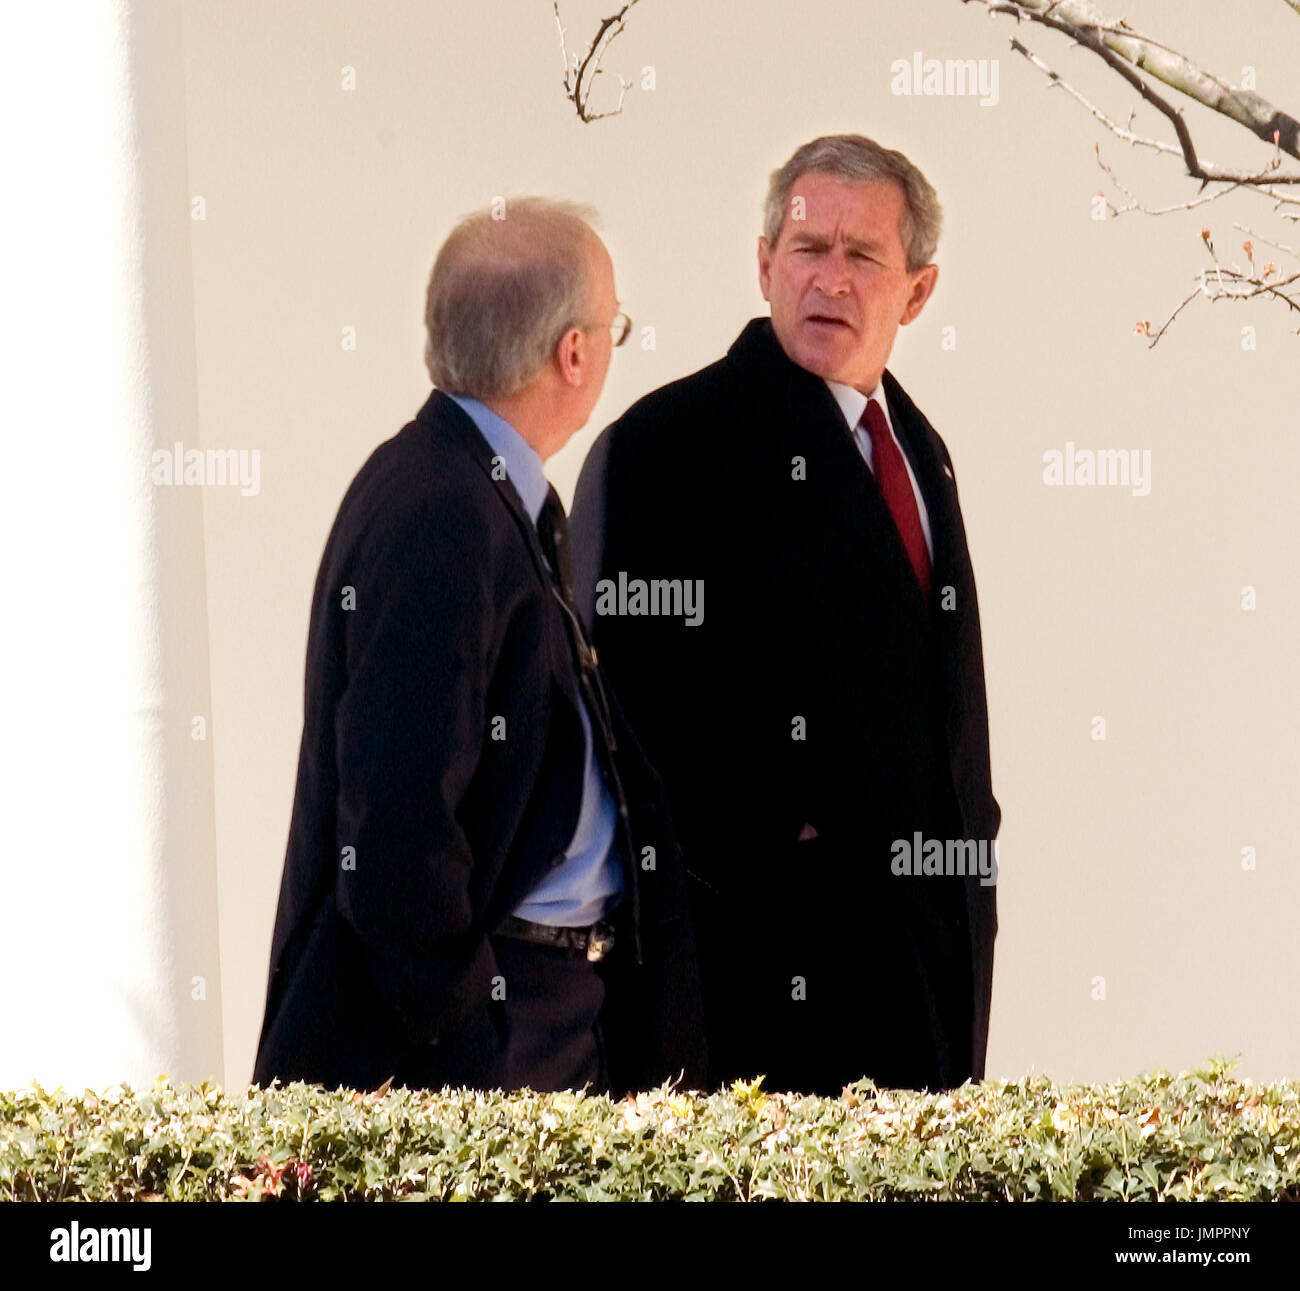 Washington, D.C. - February 28, 2006 -- United States President George W. Bush walks along the Colonnade from the Oval Office to the residence of the White House with Karl Rove, his senior advisor, chief political strategist, and Deputy White House Chief of Staff in charge of policy on February 28, 2006.  The President left the White House a few minutes later aboard Marine 1 for his 5 day trip to India and Pakistan. Credit: Ron Sachs / CNP Stock Photo